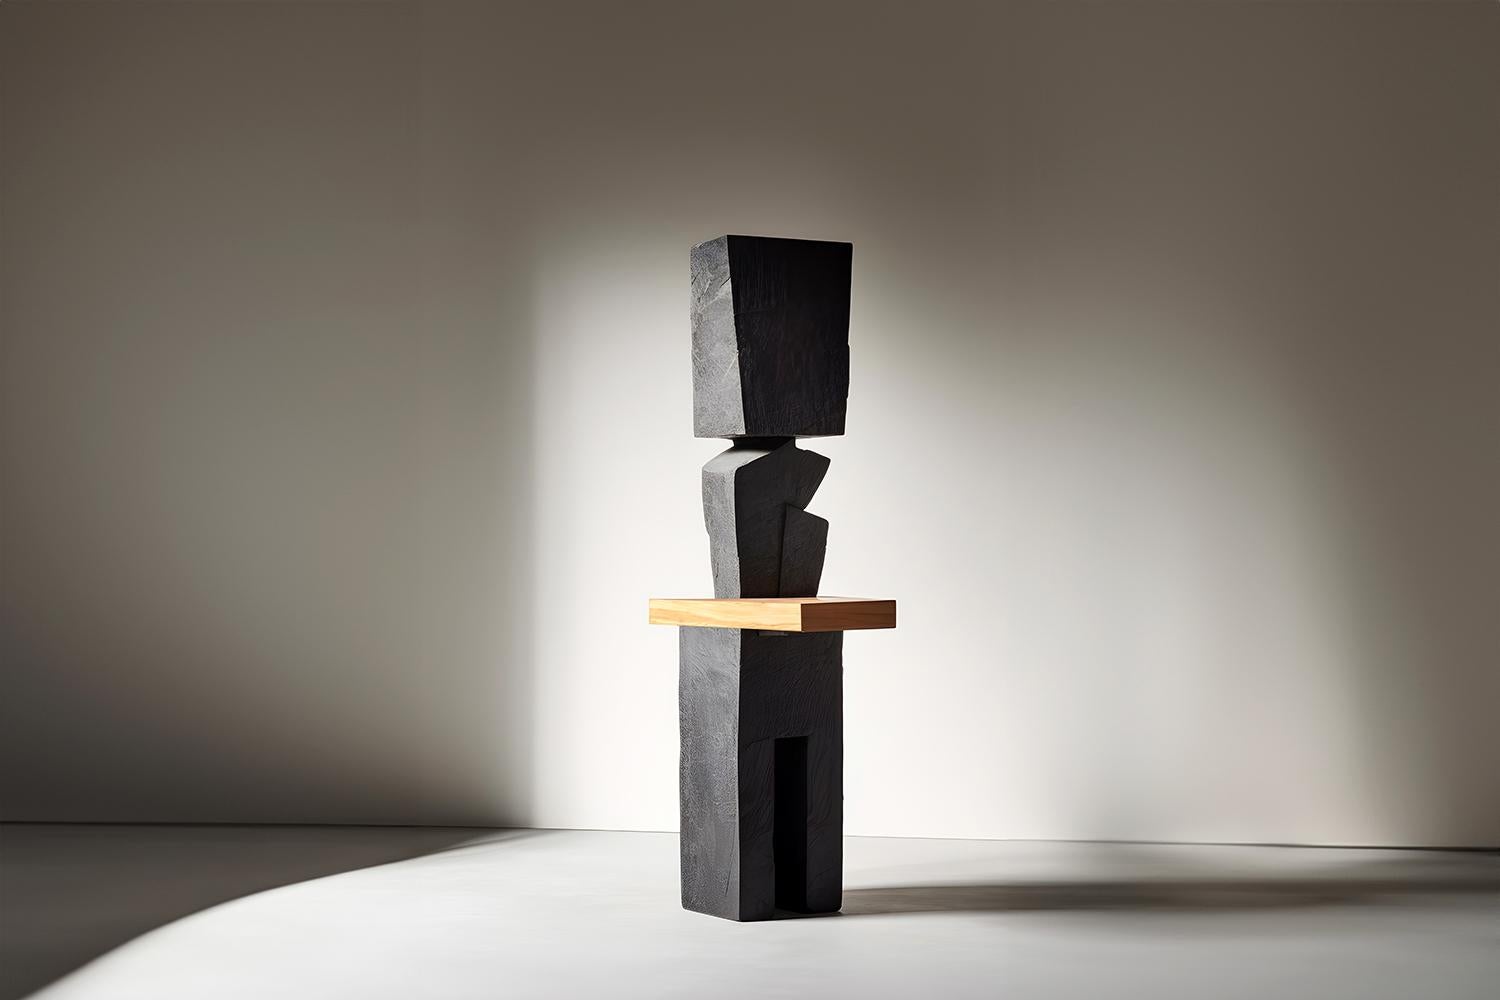 Monumental Wooden Sculpture Inspired in Constantin Brancusi Style, Unseen Force 28 by Joel Escalona

This monolithic sculpture, designed by the talented Artist Joel Escalona, is a towering example of beauty in craftsmanship. Hand and digital machine